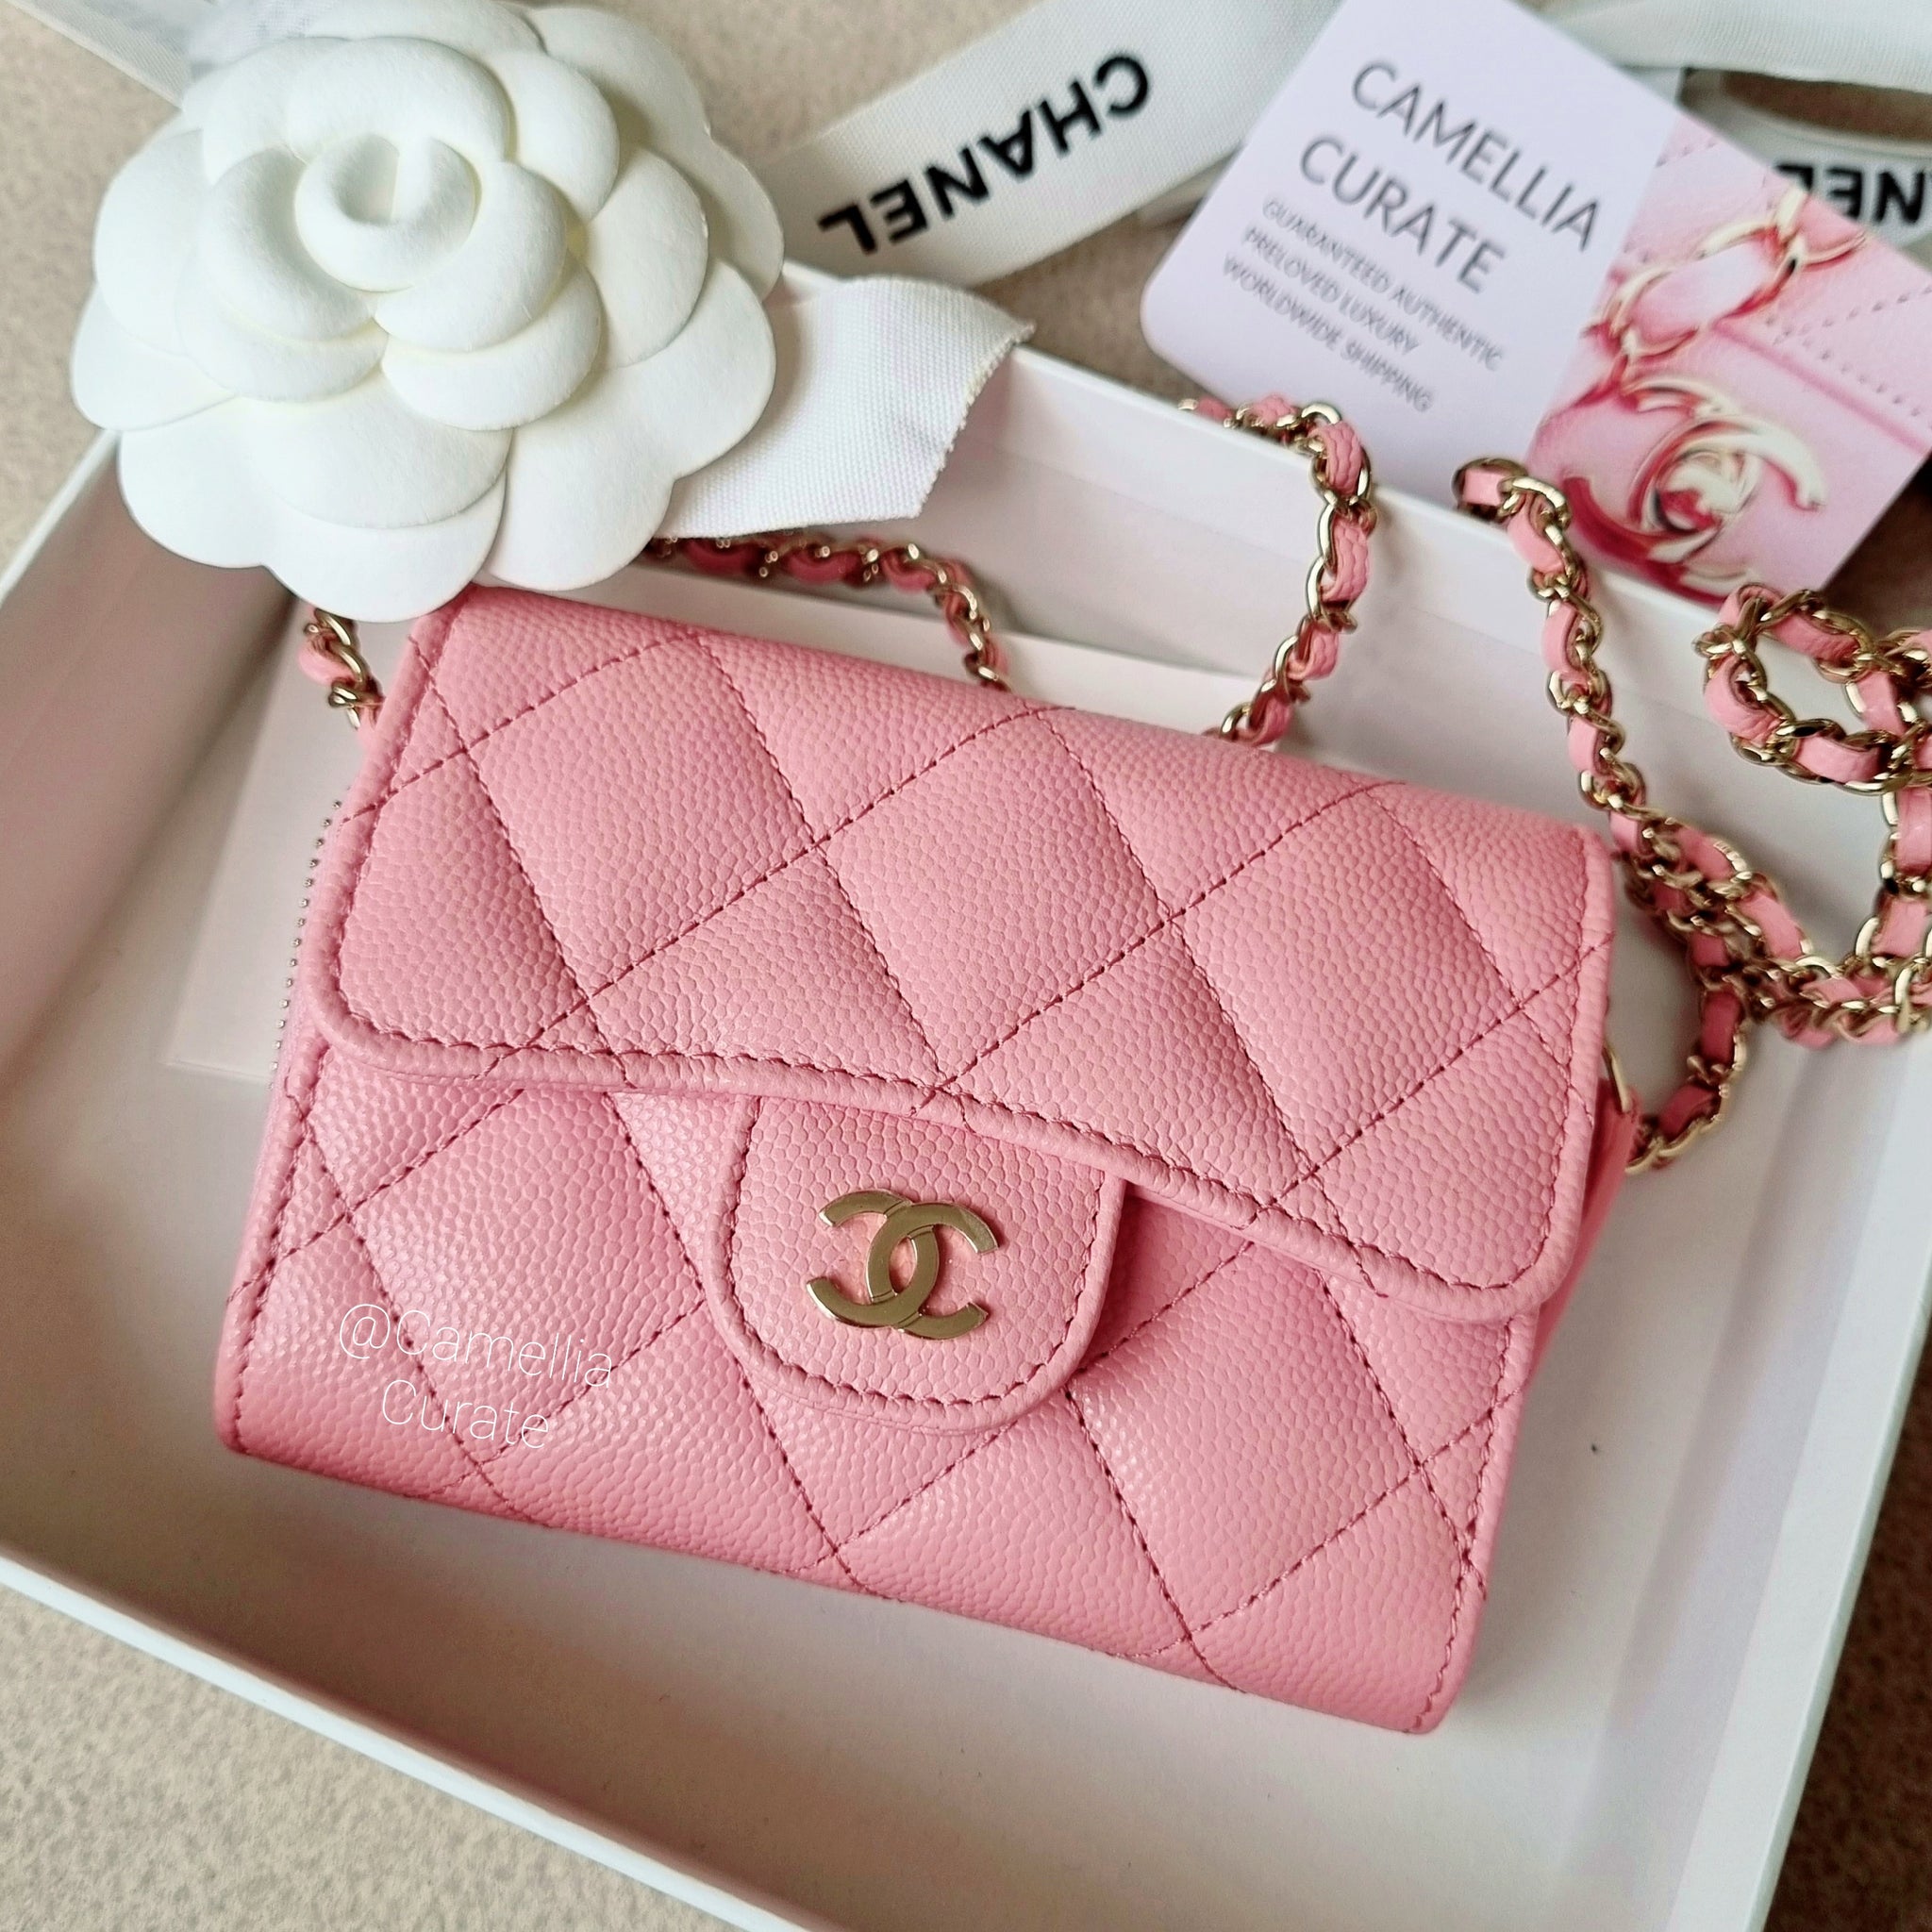 Chanel Pale Pink Caviar Camellia Card Holder